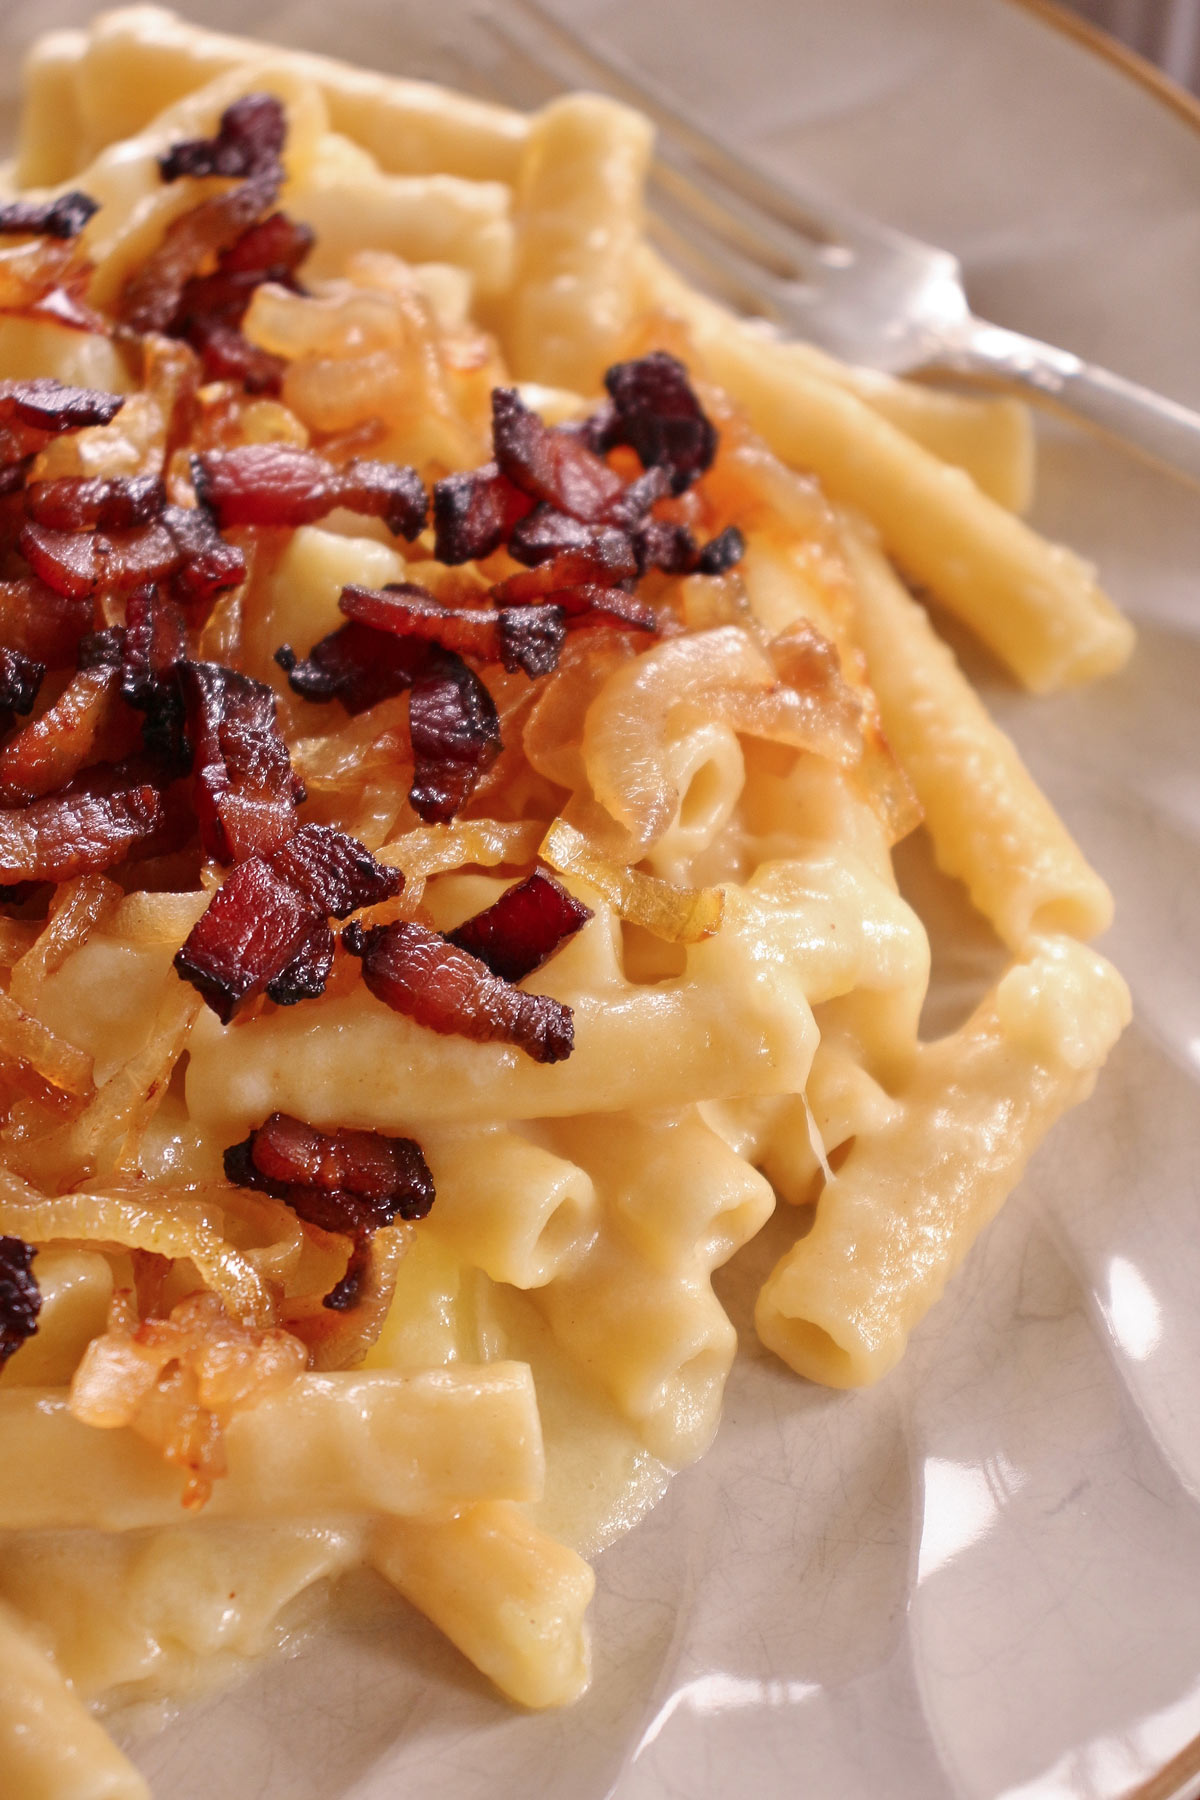 Closeup of Swiss mac and cheese made with ziti, topped with bacon pieces.